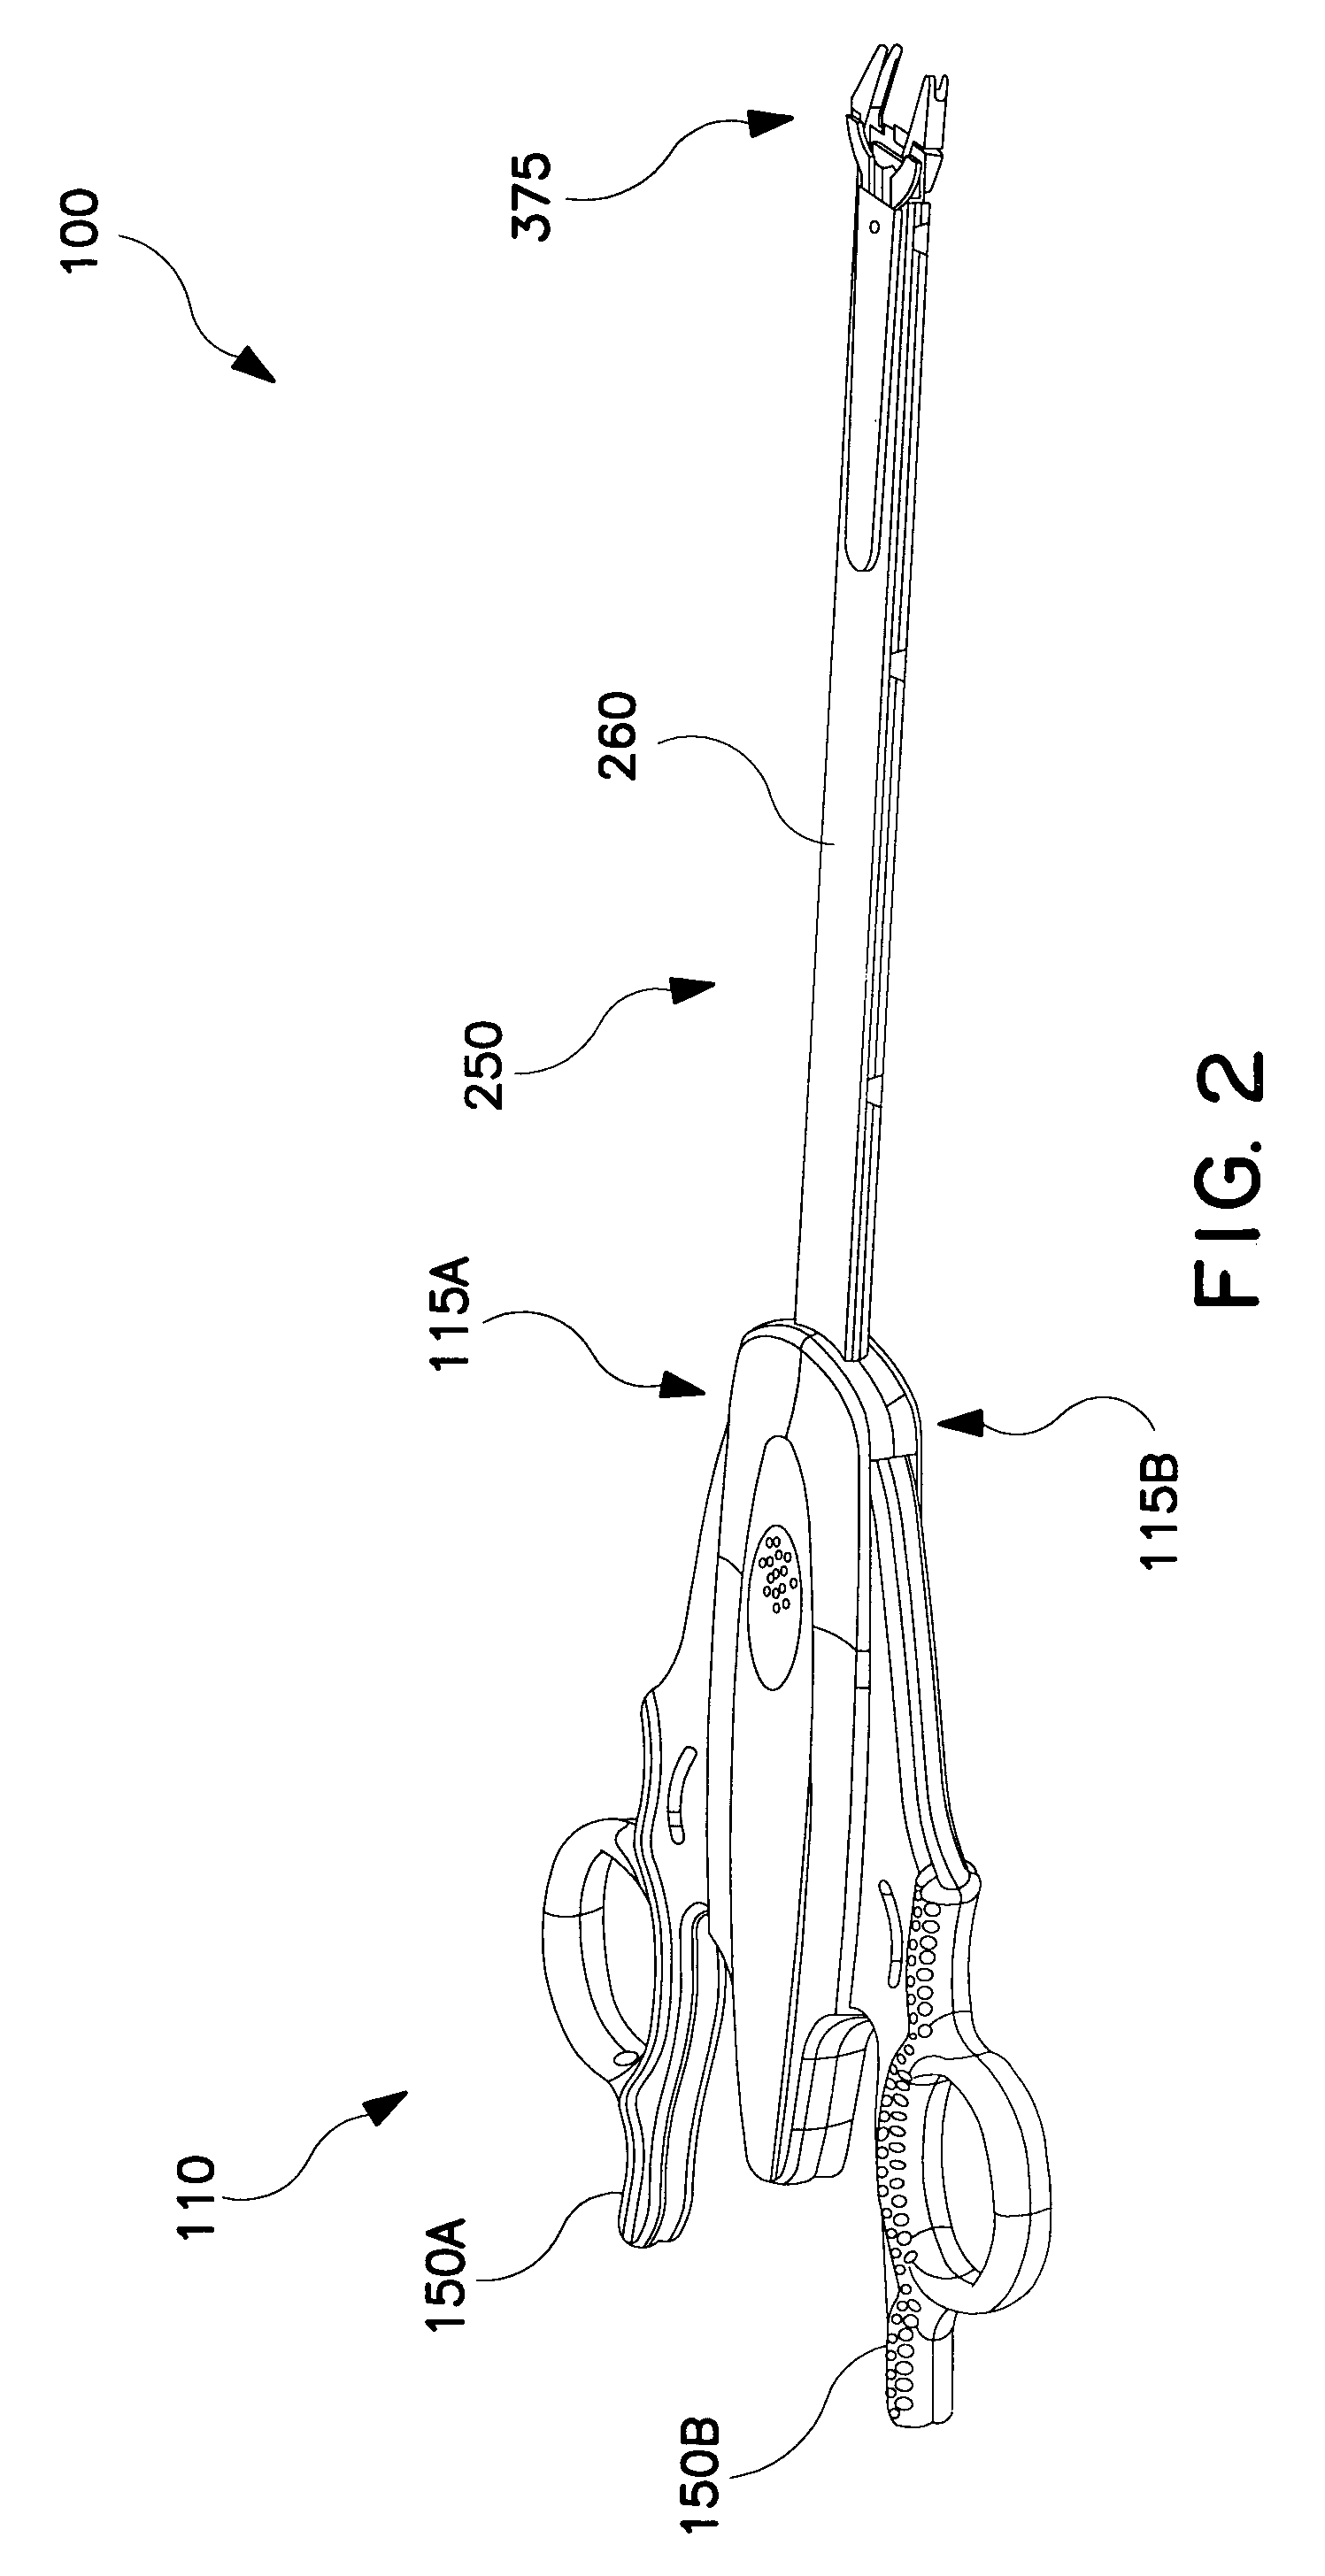 Automated-feed surgical clip applier and related methods